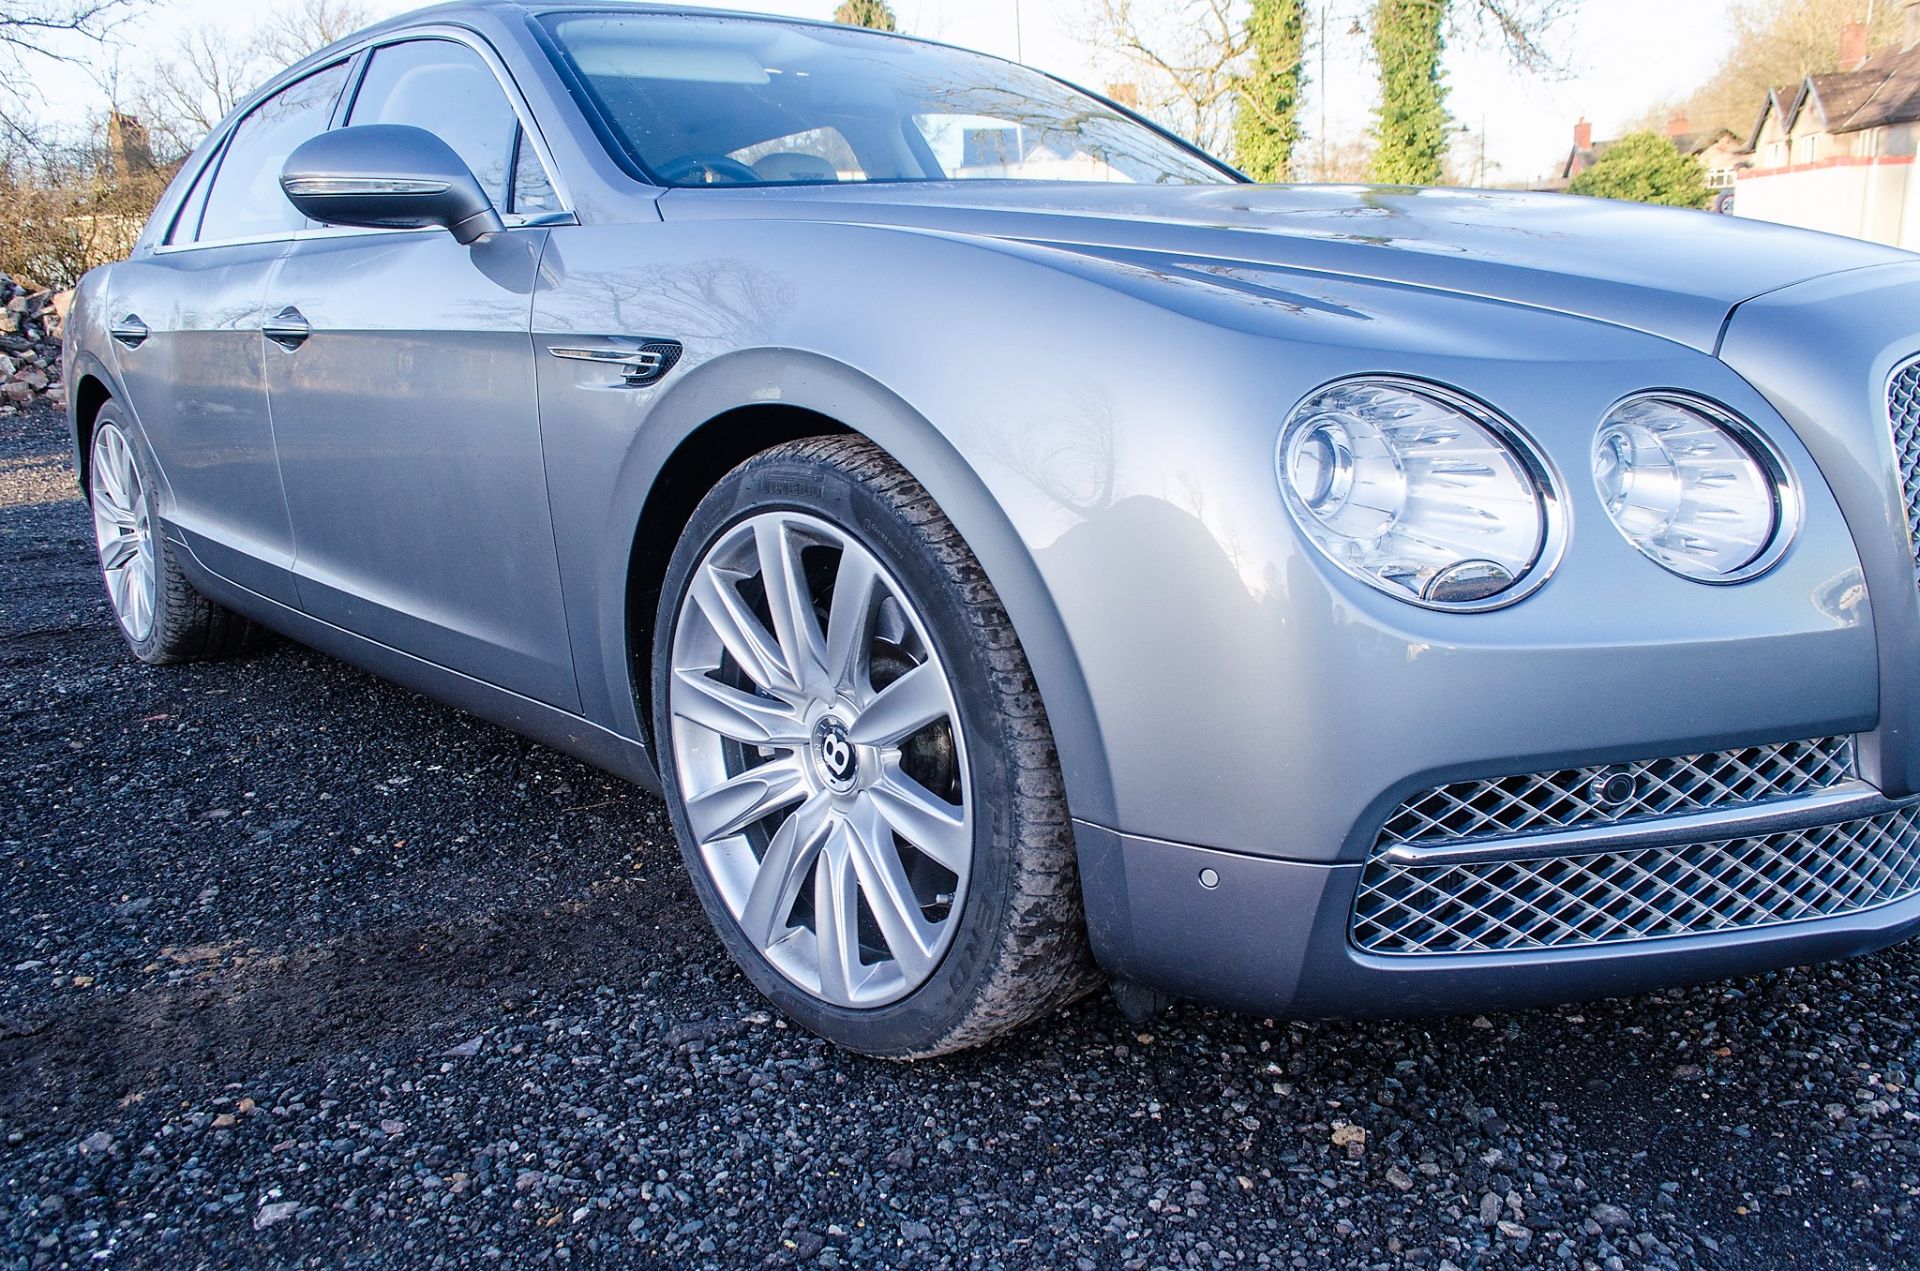 Bentley Flying Spur 6.0 W12 automatic 4 door saloon car Registration Number: MJ63 NHM Date of - Image 15 of 51